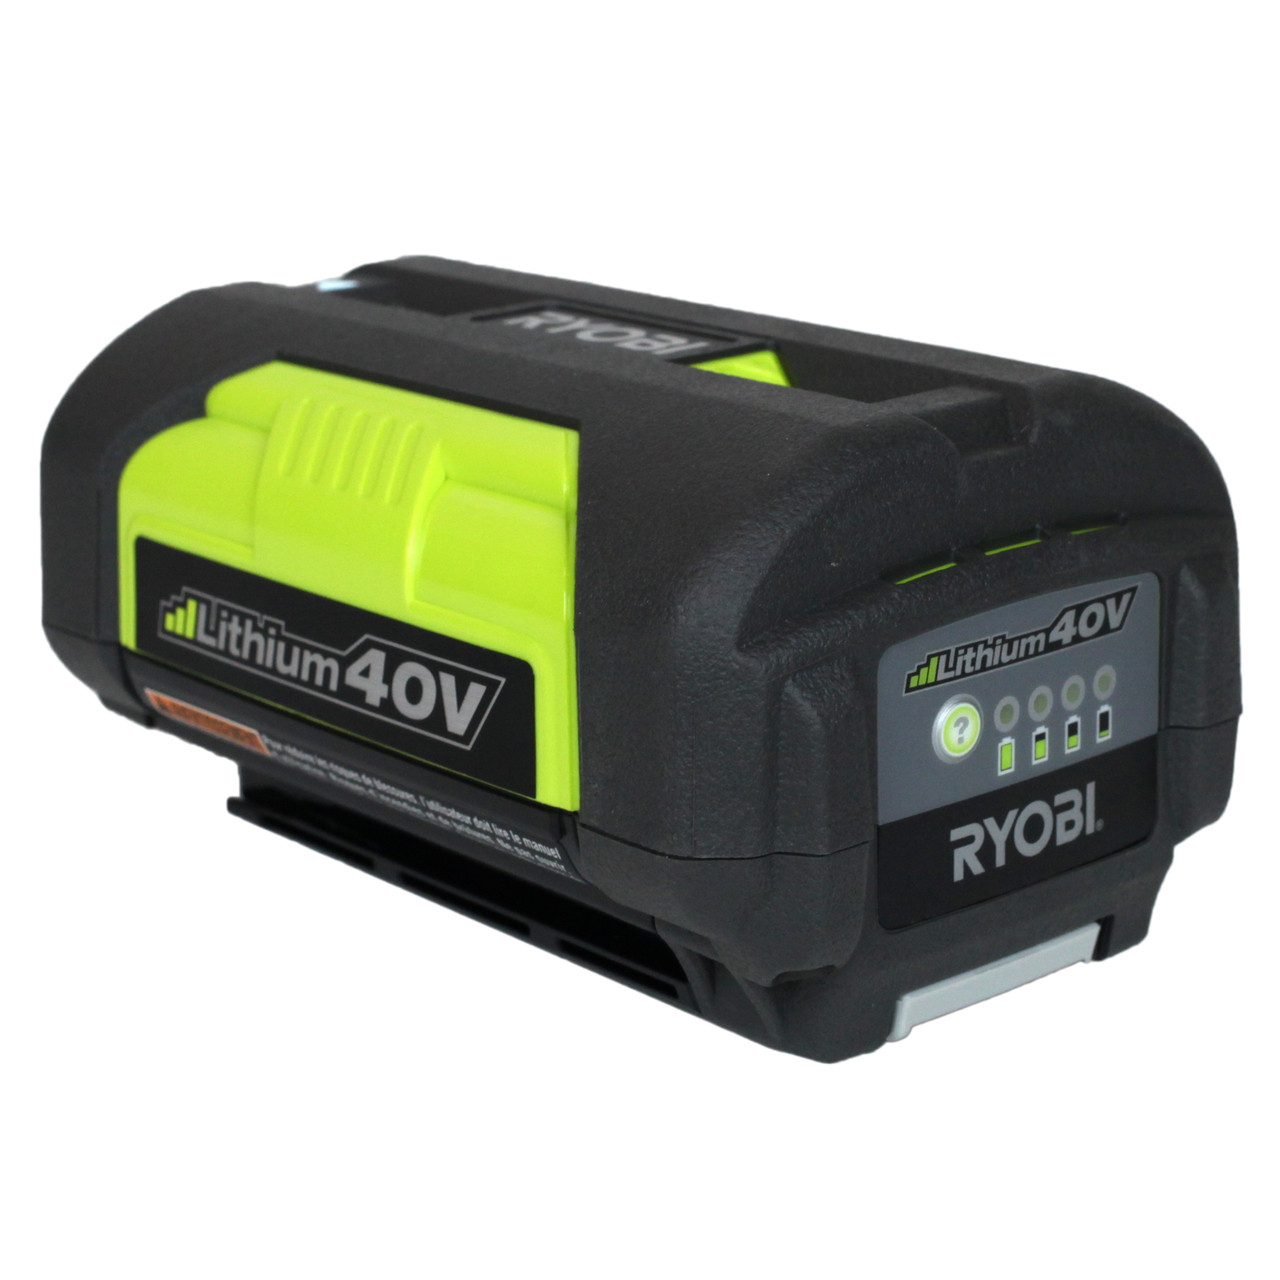 How Much Is A 40 Volt Ryobi Battery